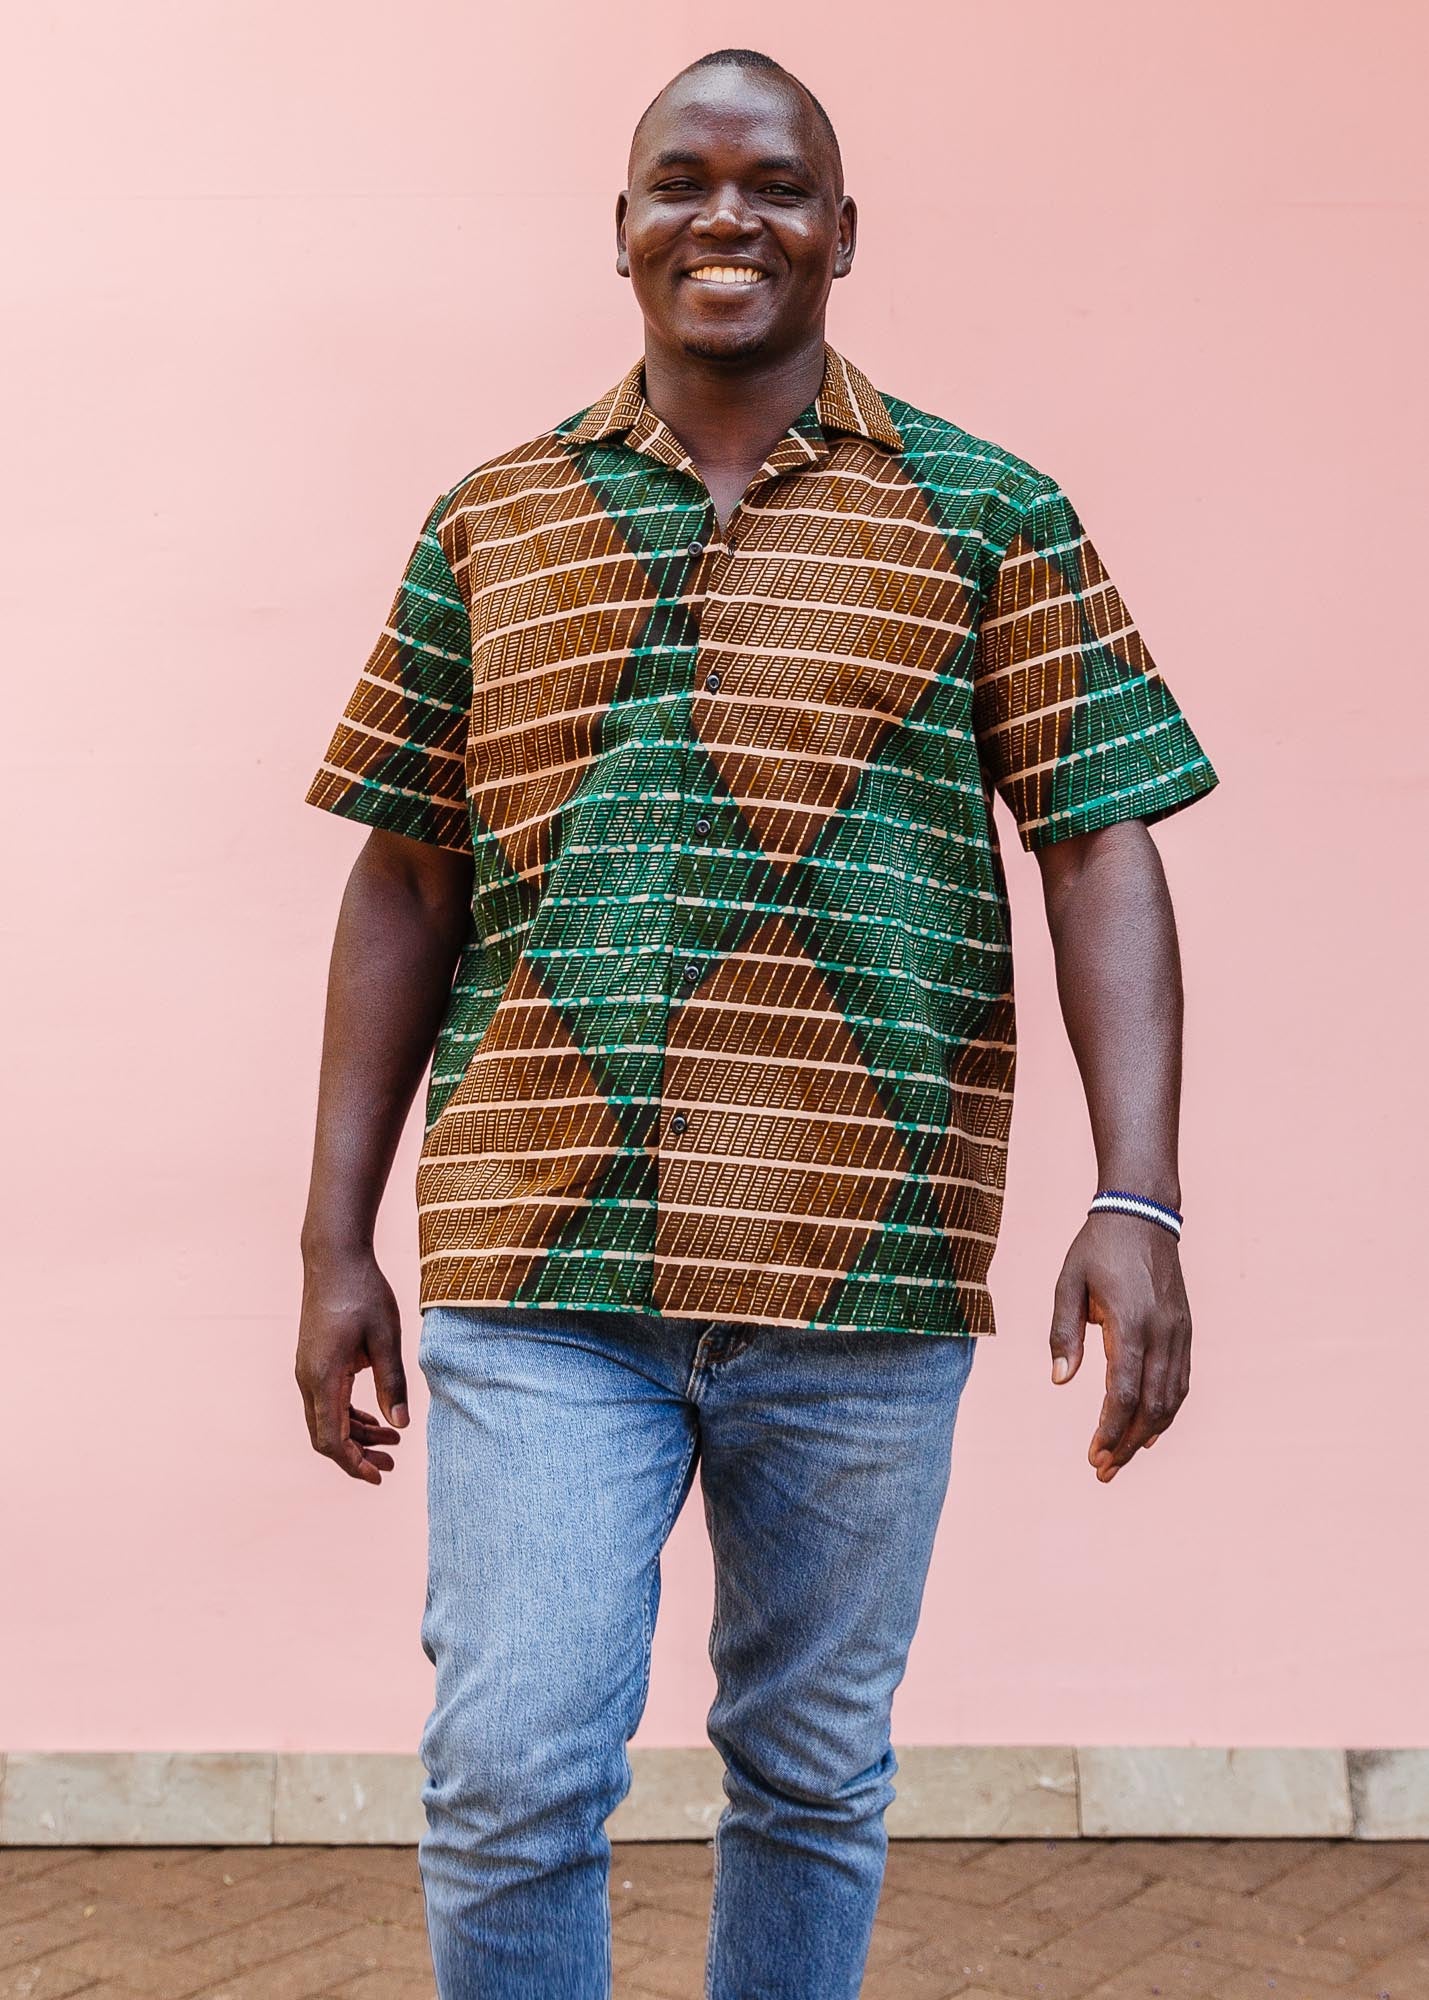 The model is wearing brown, camel, green and black diamond shaped geometric print shirt